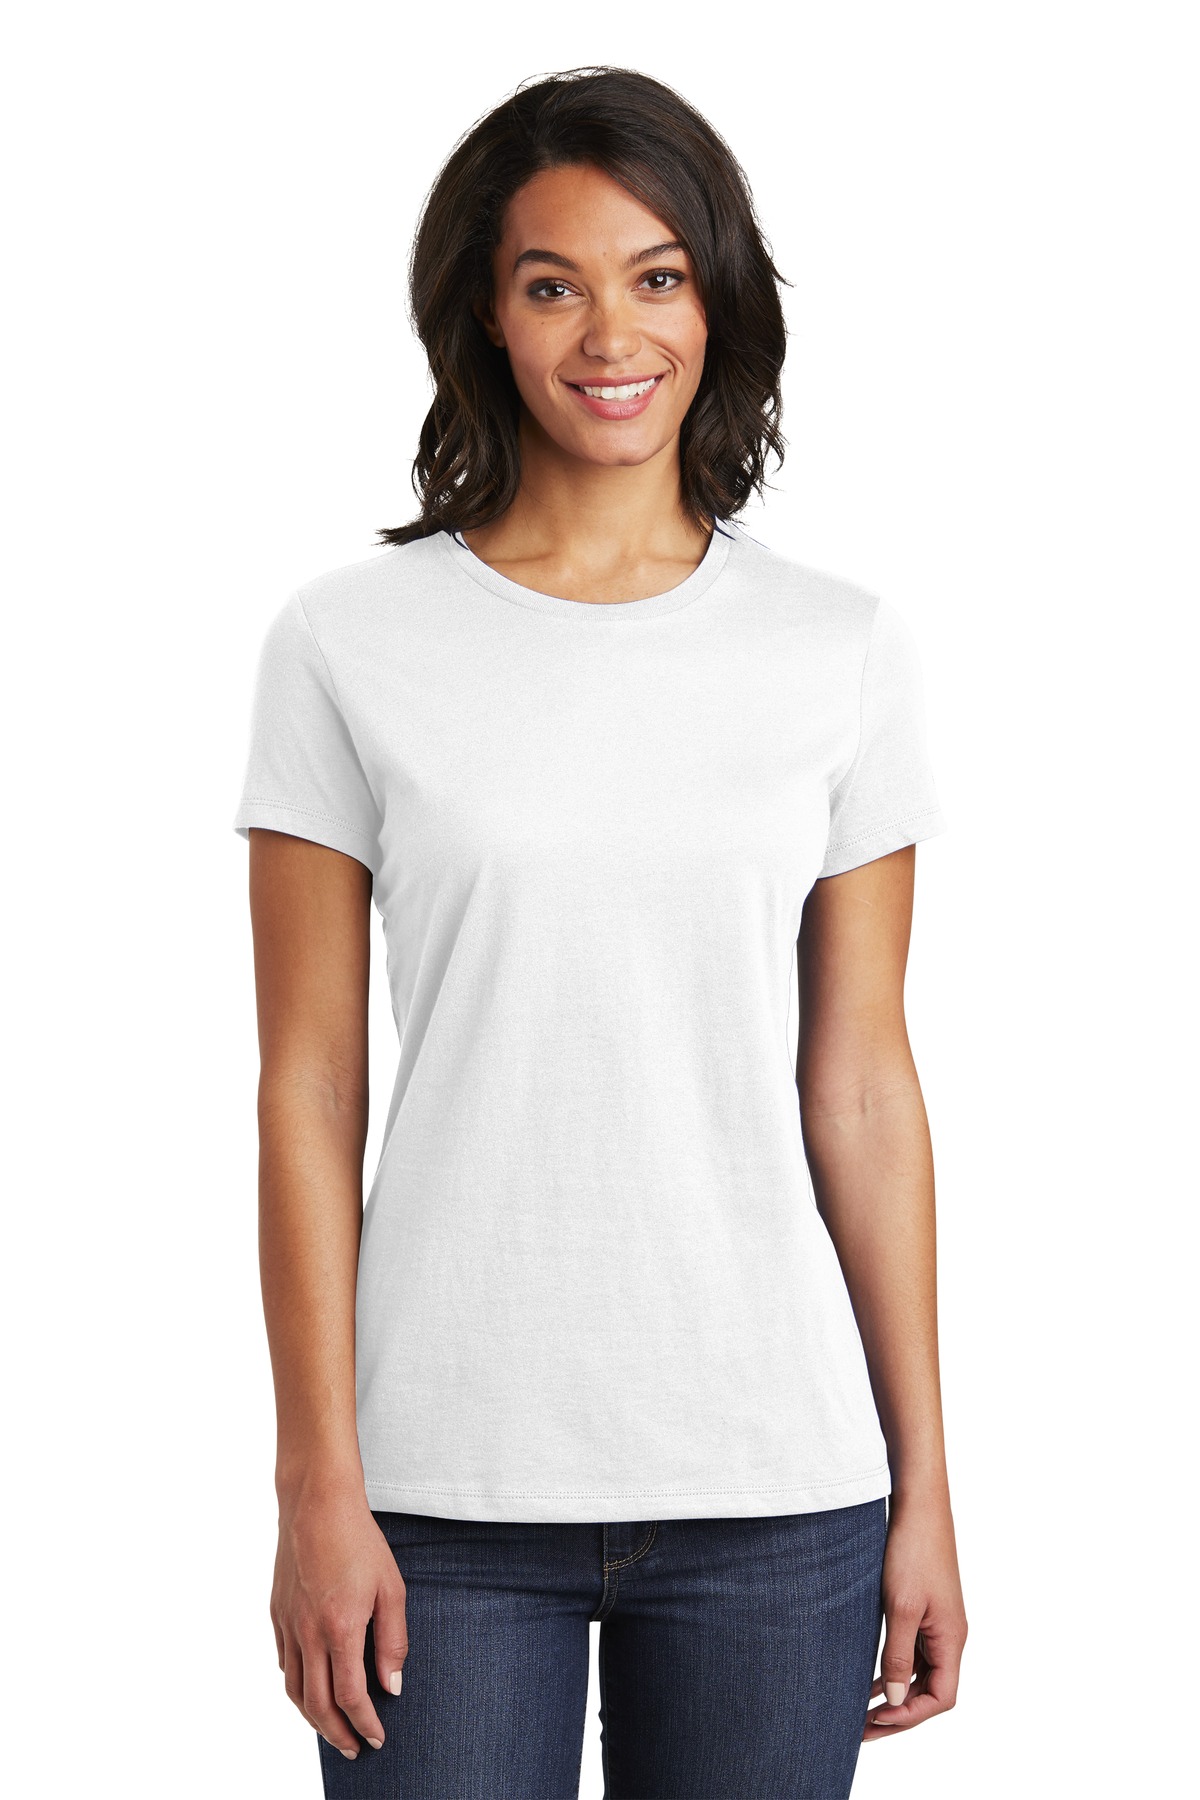 District Ladies Hospitality T-Shirts ® Womens Very Important Tee ® .-District